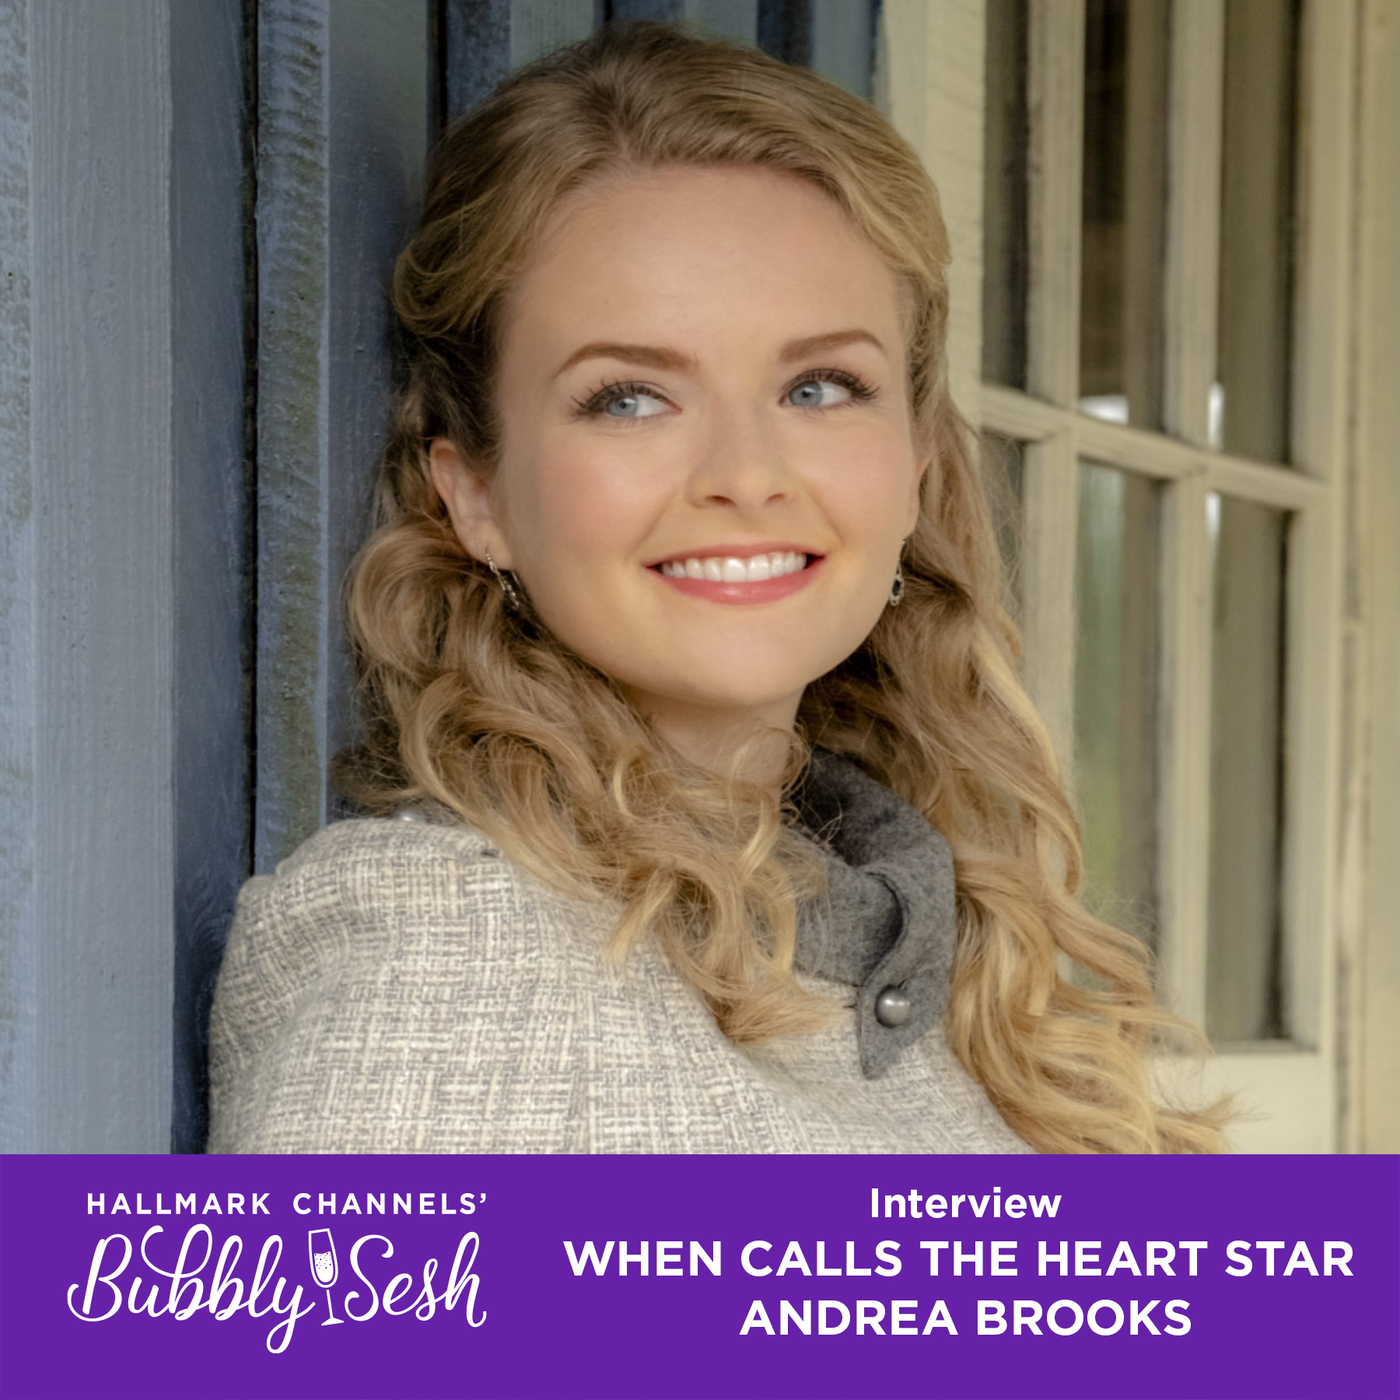  Andrea Brooks' Interview: When Calls The Heart Wednesday 